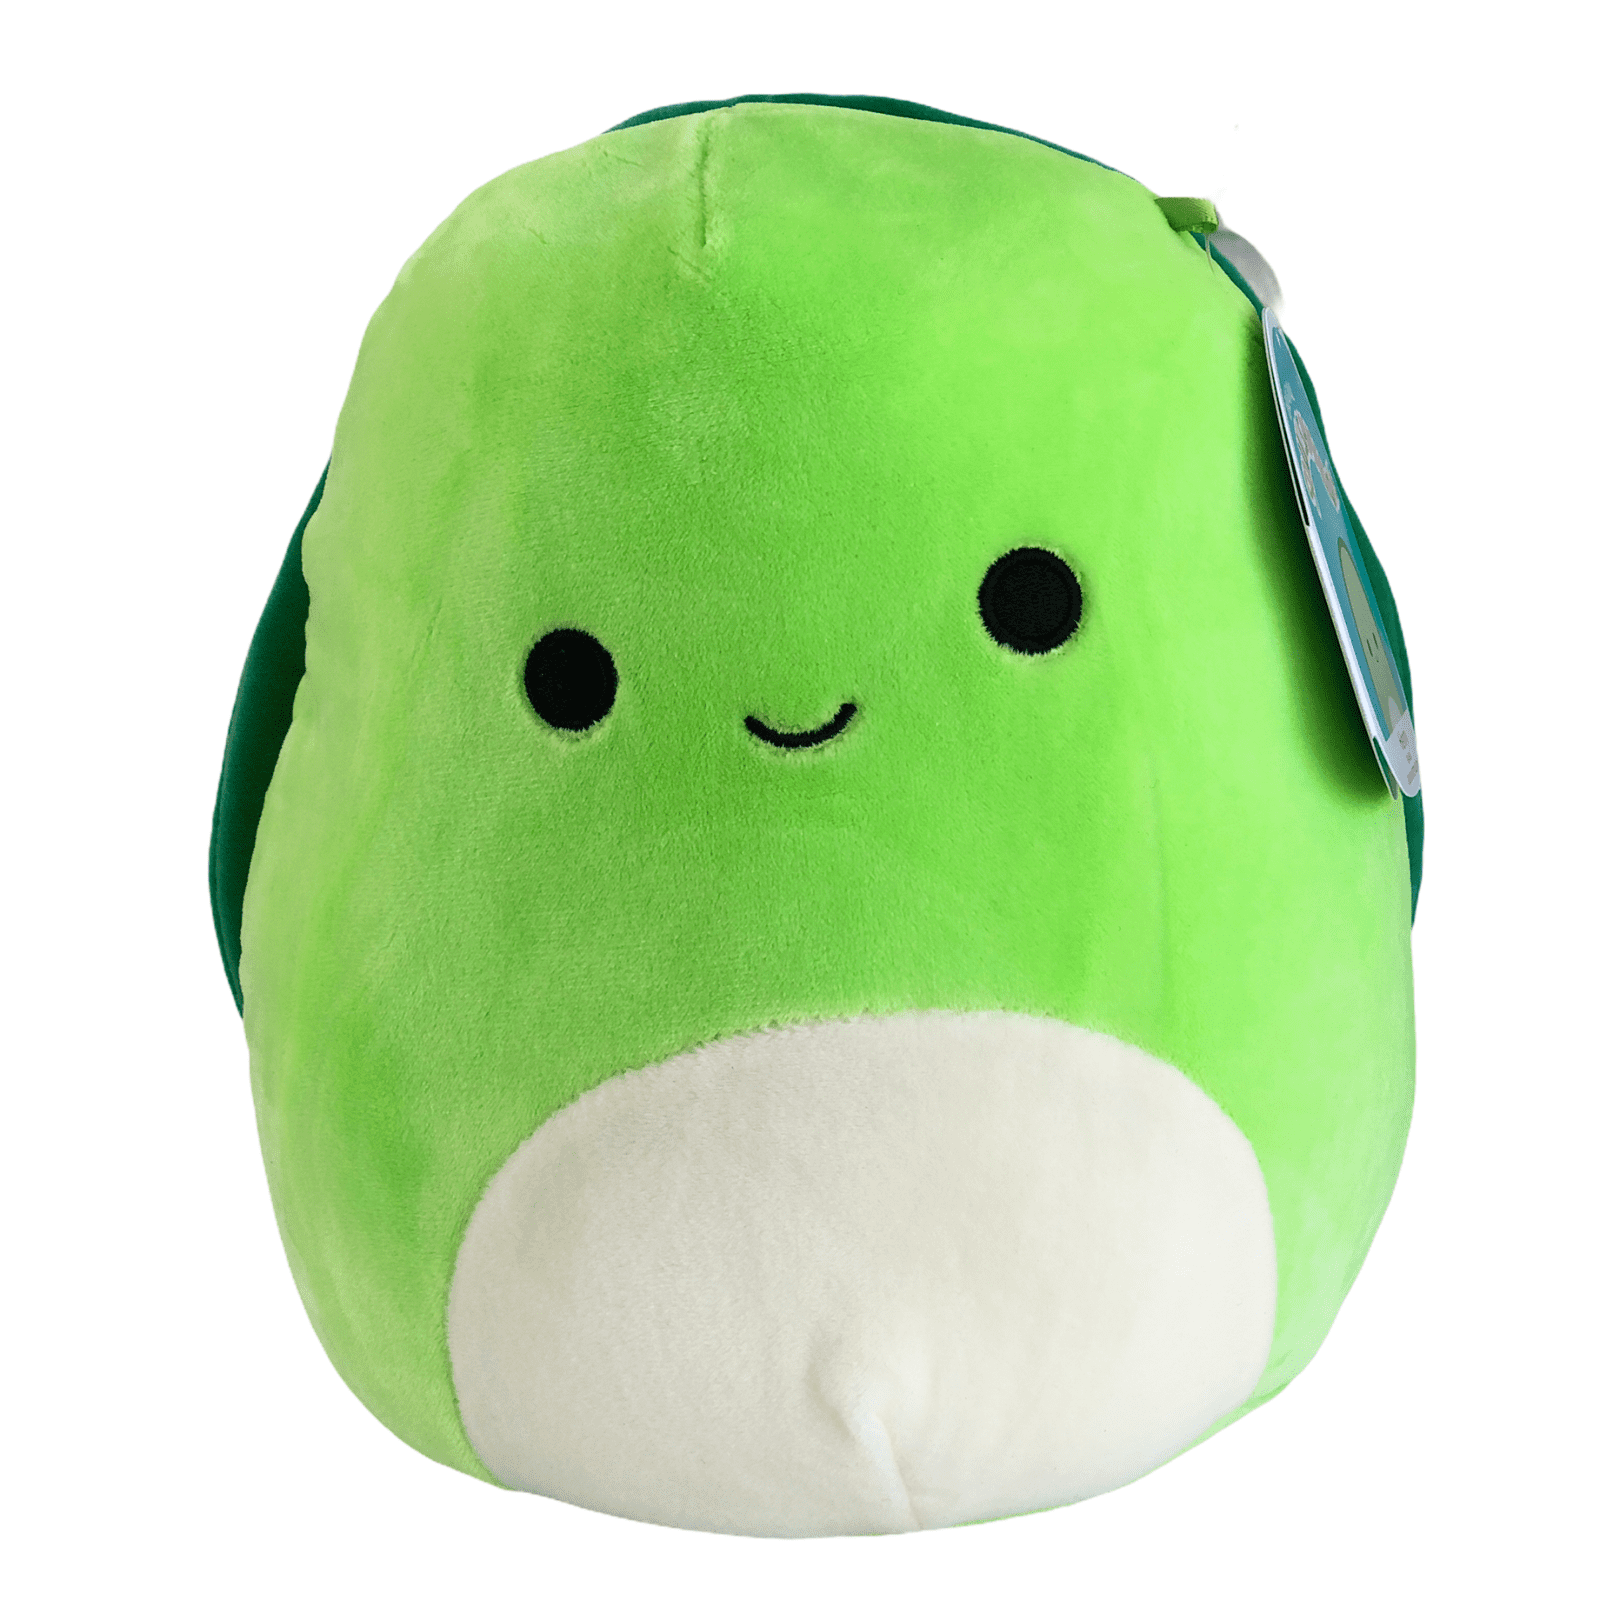 2021 Kellytoy Squishmallow 8" Henry The Turtle Plush HTF for sale online 